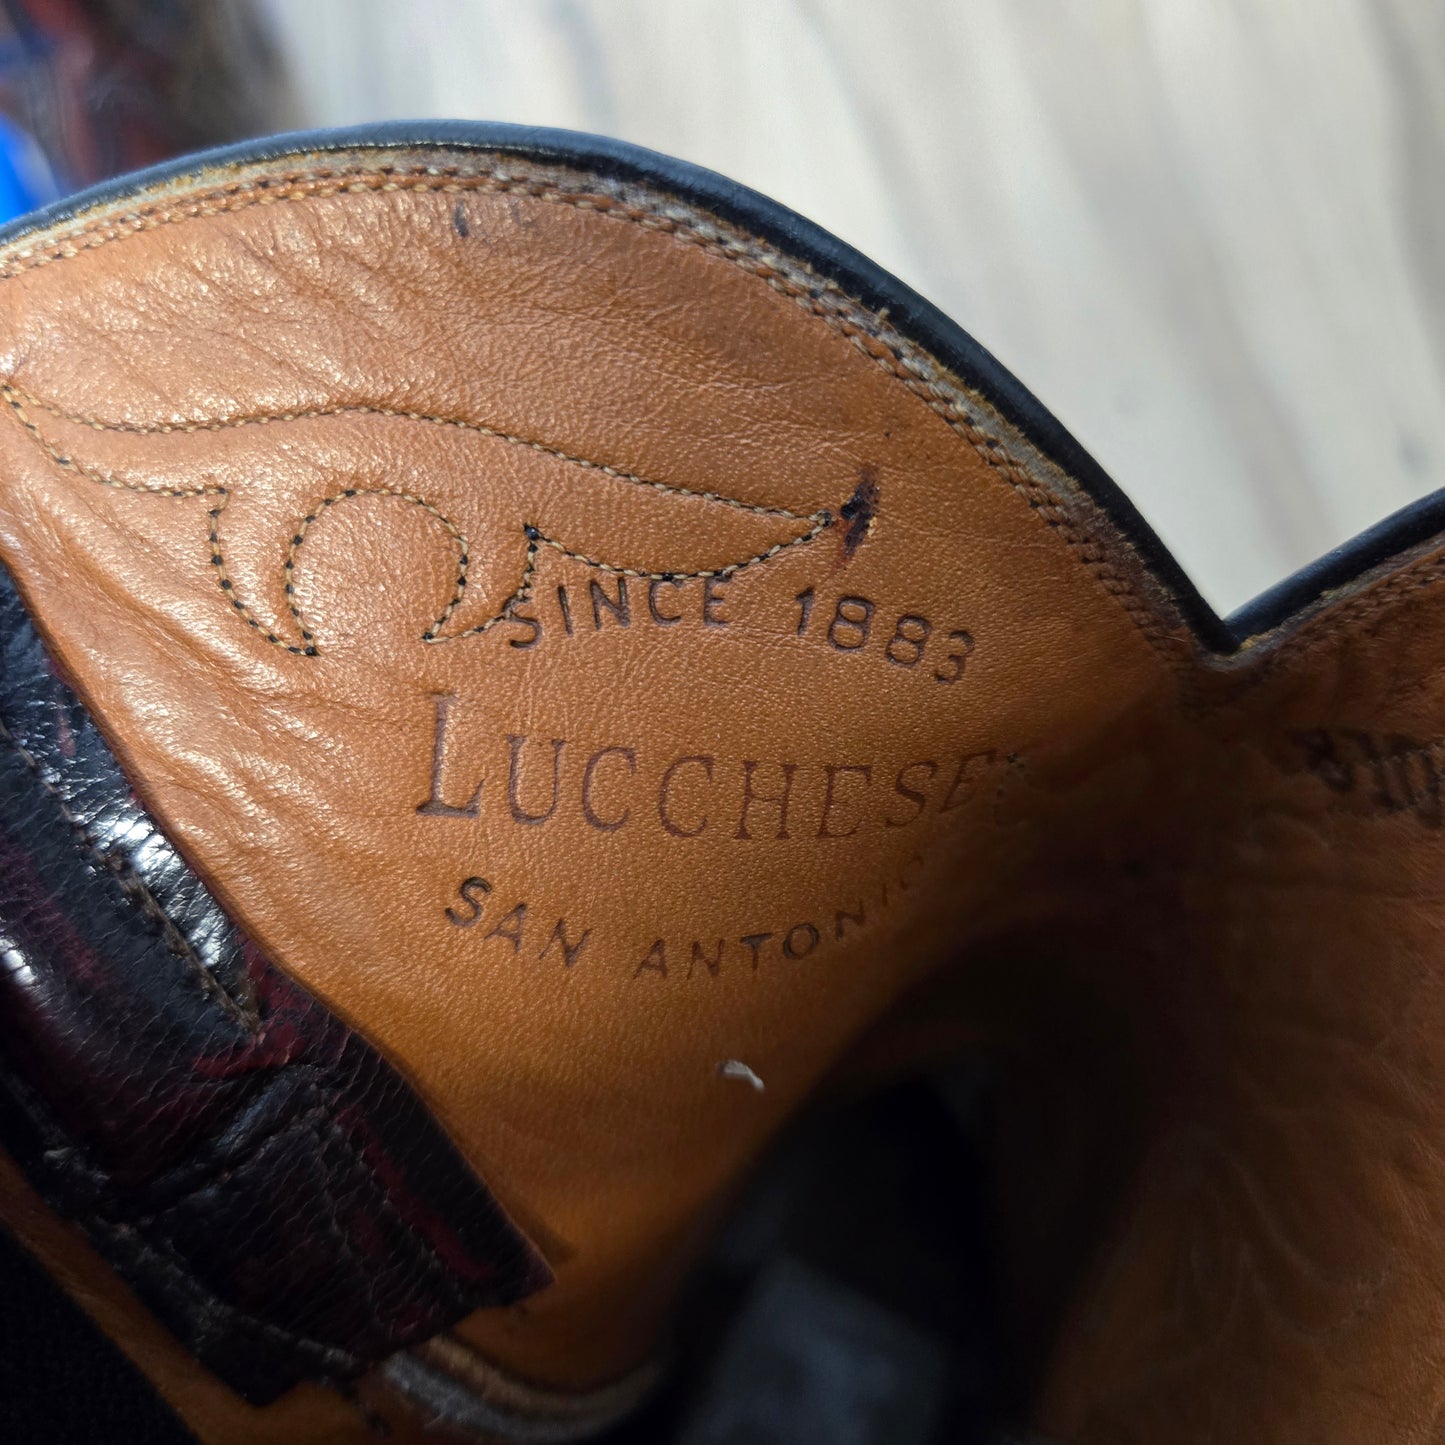 Lucchese San Antonio Black Cherry Leather Western Boots